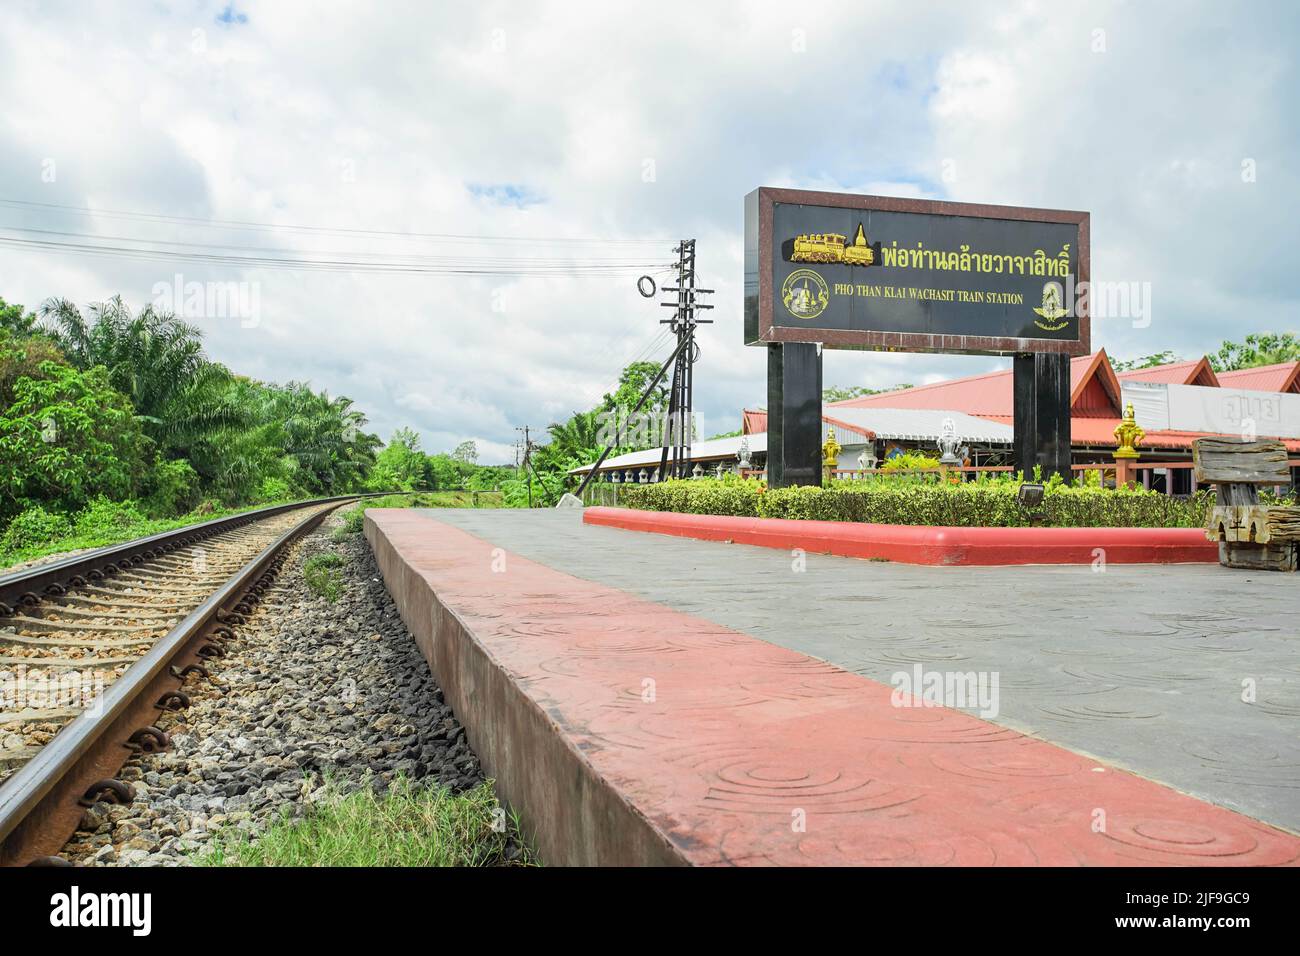 Nakhon Si Thammarat Province, THAILAND - June 26, 2022: Train station sign of Wat That Noi temple in Nakhon Si Thammarat, Thailand. This temple is the Stock Photo